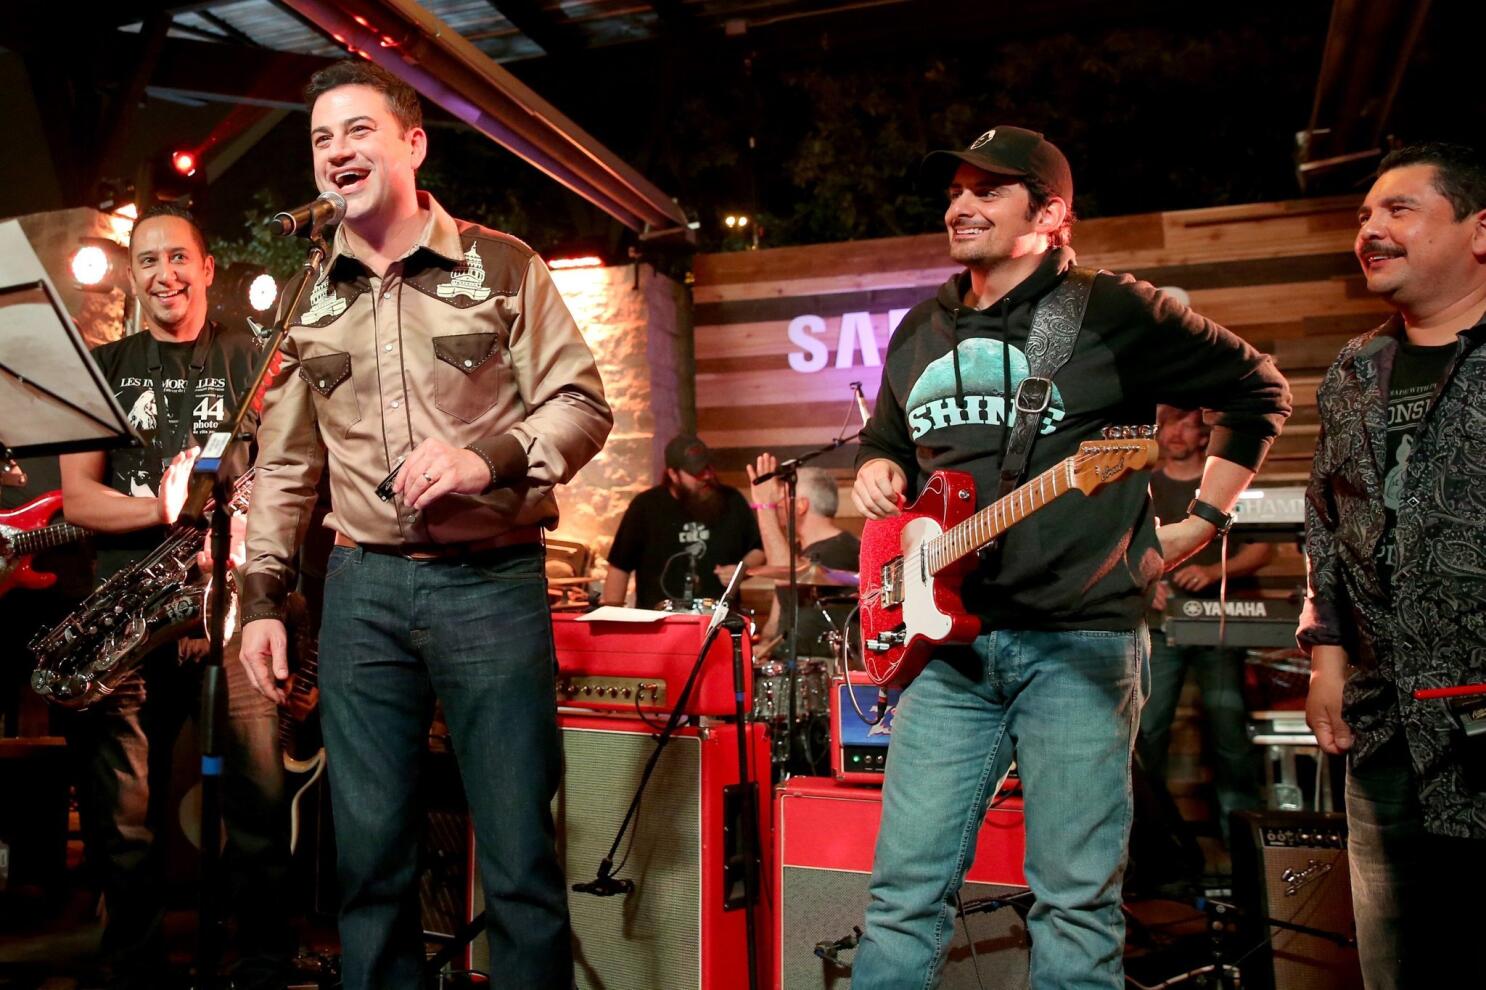 Jimmy Kimmel's move to SXSW pays off in barbecue and viewership